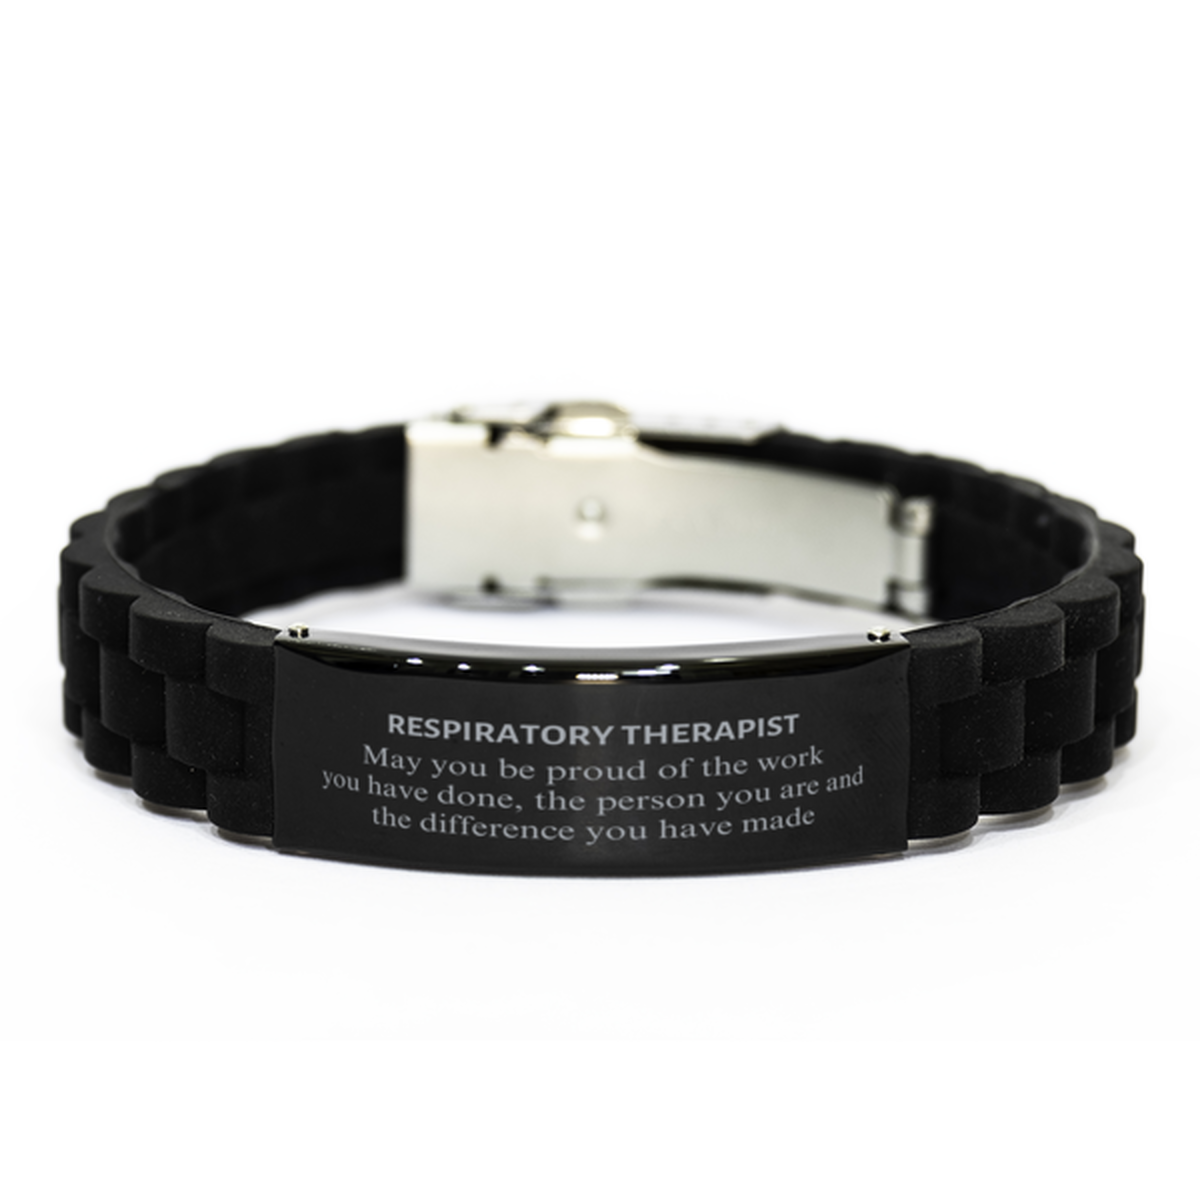 Respiratory Therapist May you be proud of the work you have done, Retirement Respiratory Therapist Black Glidelock Clasp Bracelet for Colleague Appreciation Gifts Amazing for Respiratory Therapist